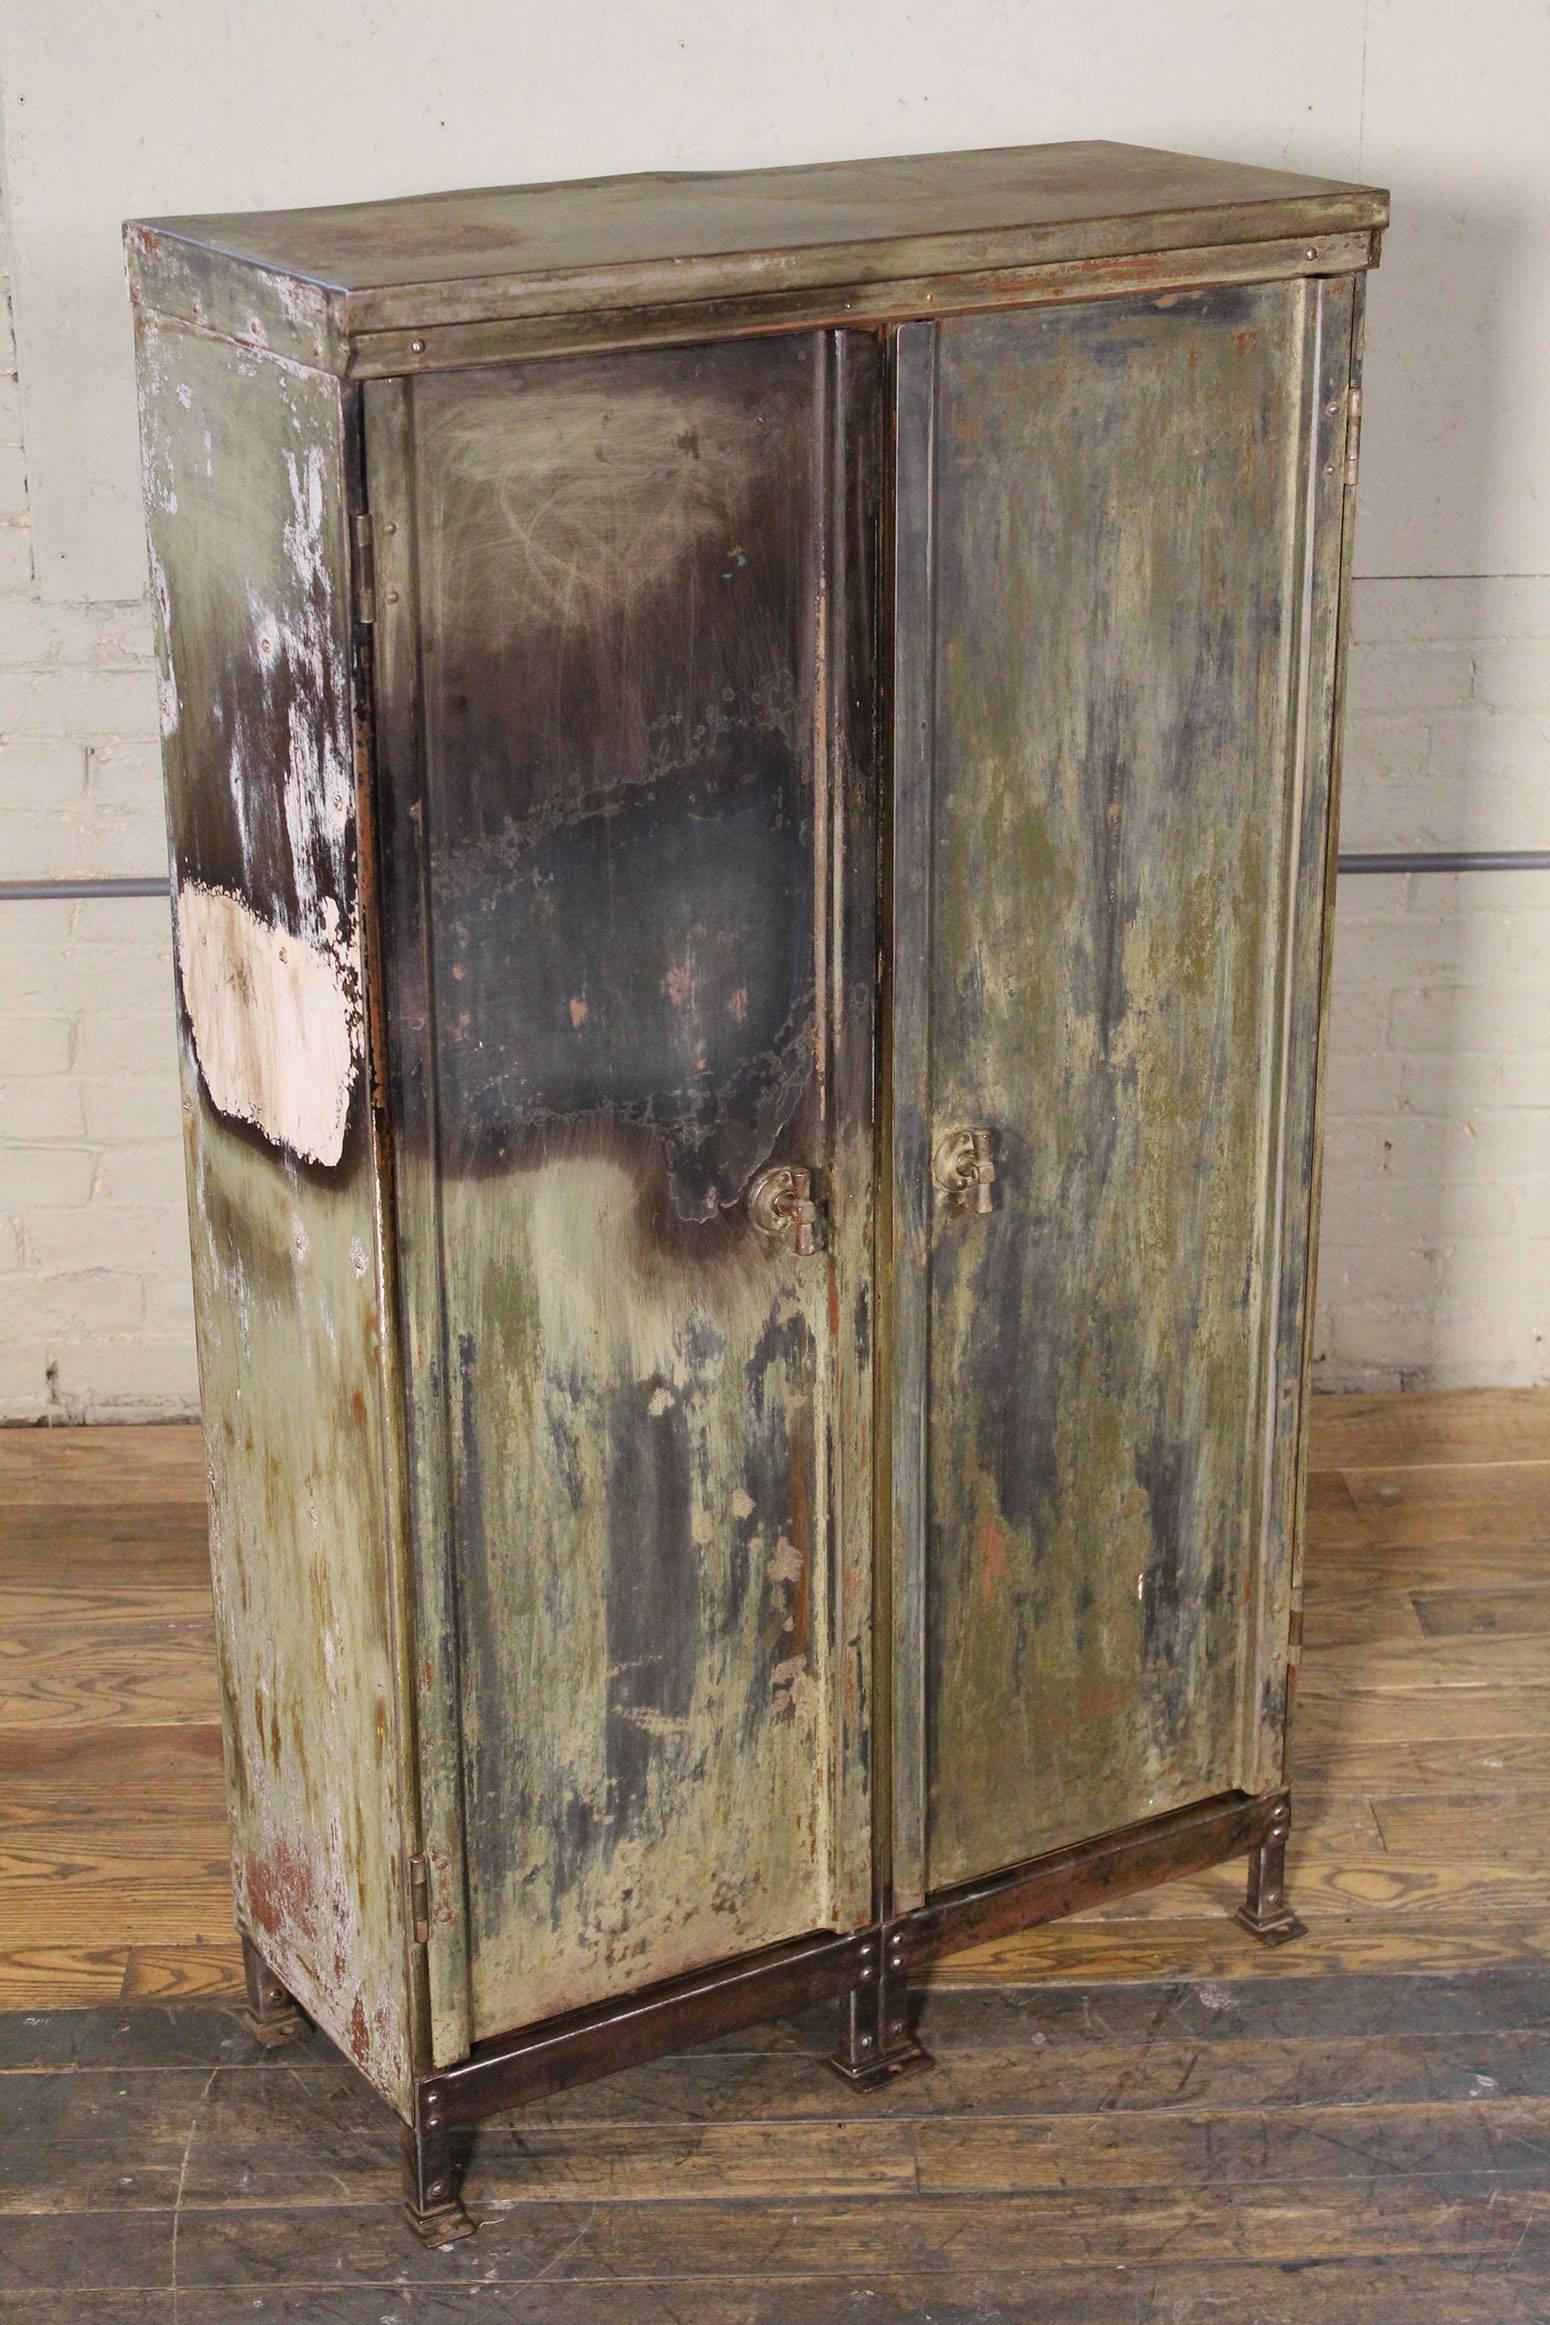 Vintage distressed painted metal storage cabinet / locker. Has been cleaned inside and out and is ready for use.